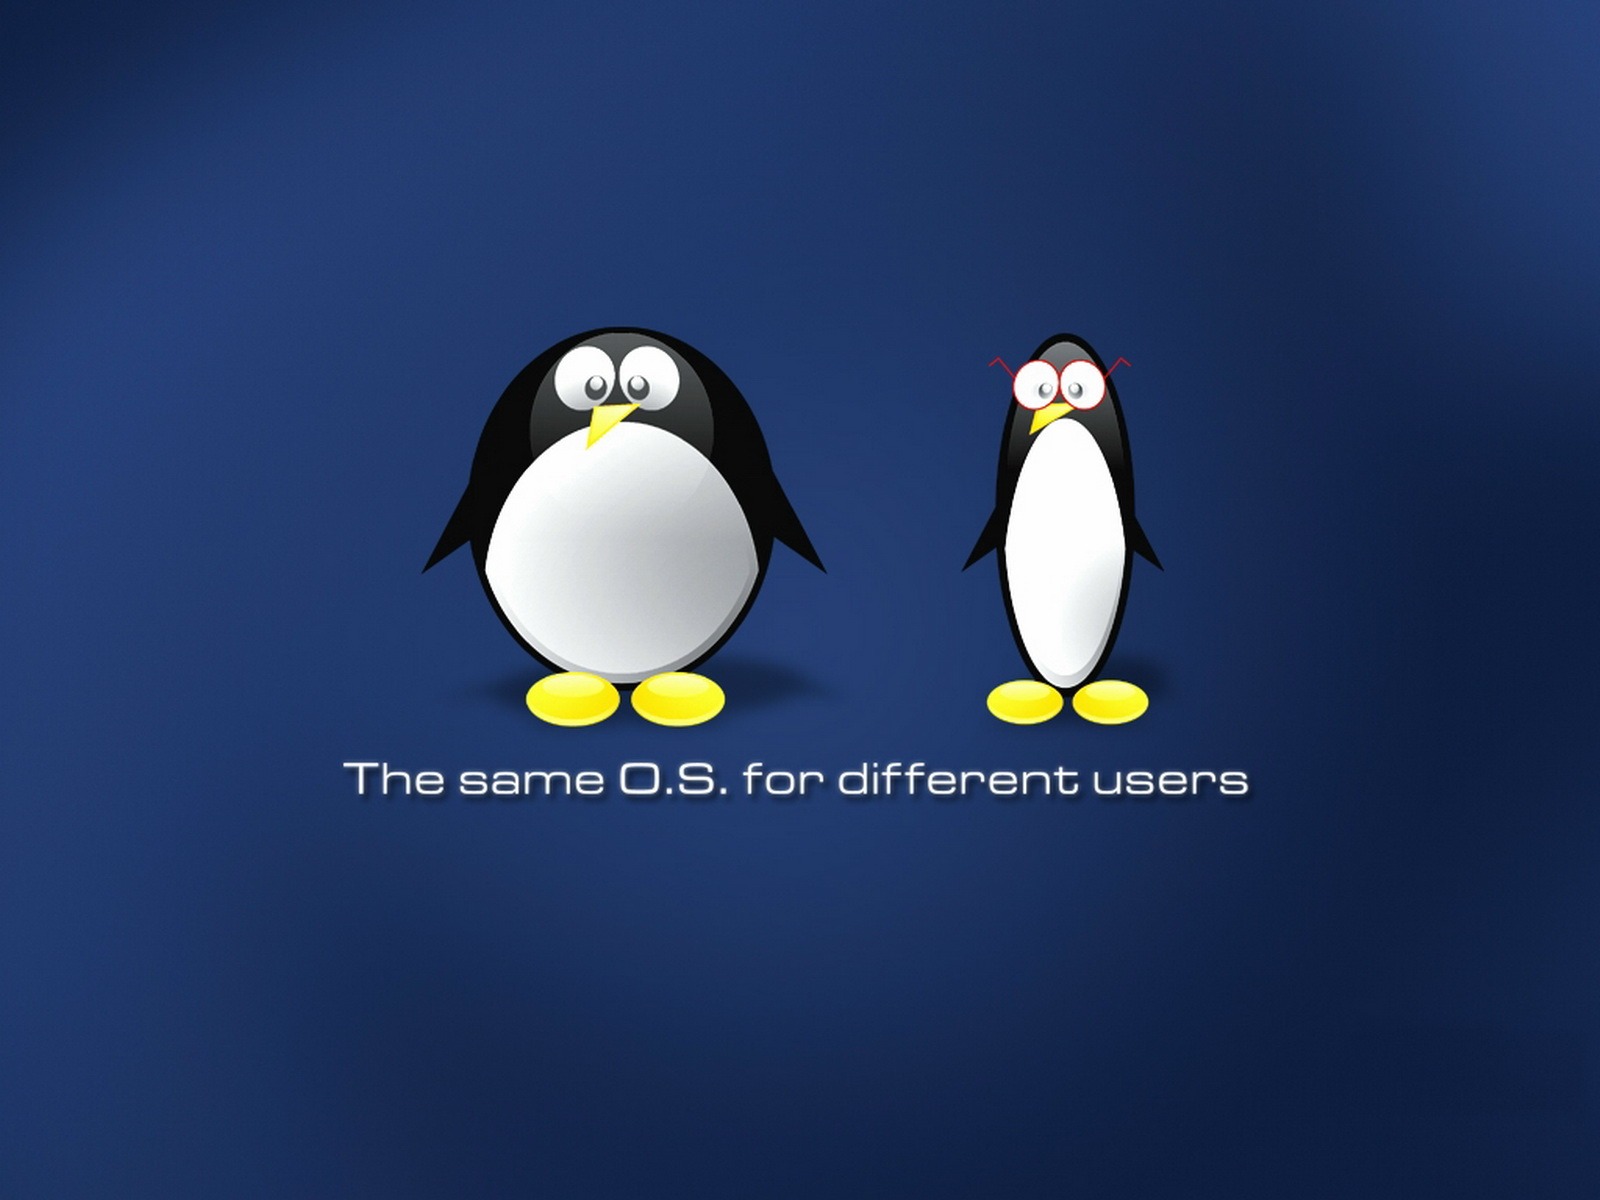 Linux tapety (2) #2 - 1600x1200